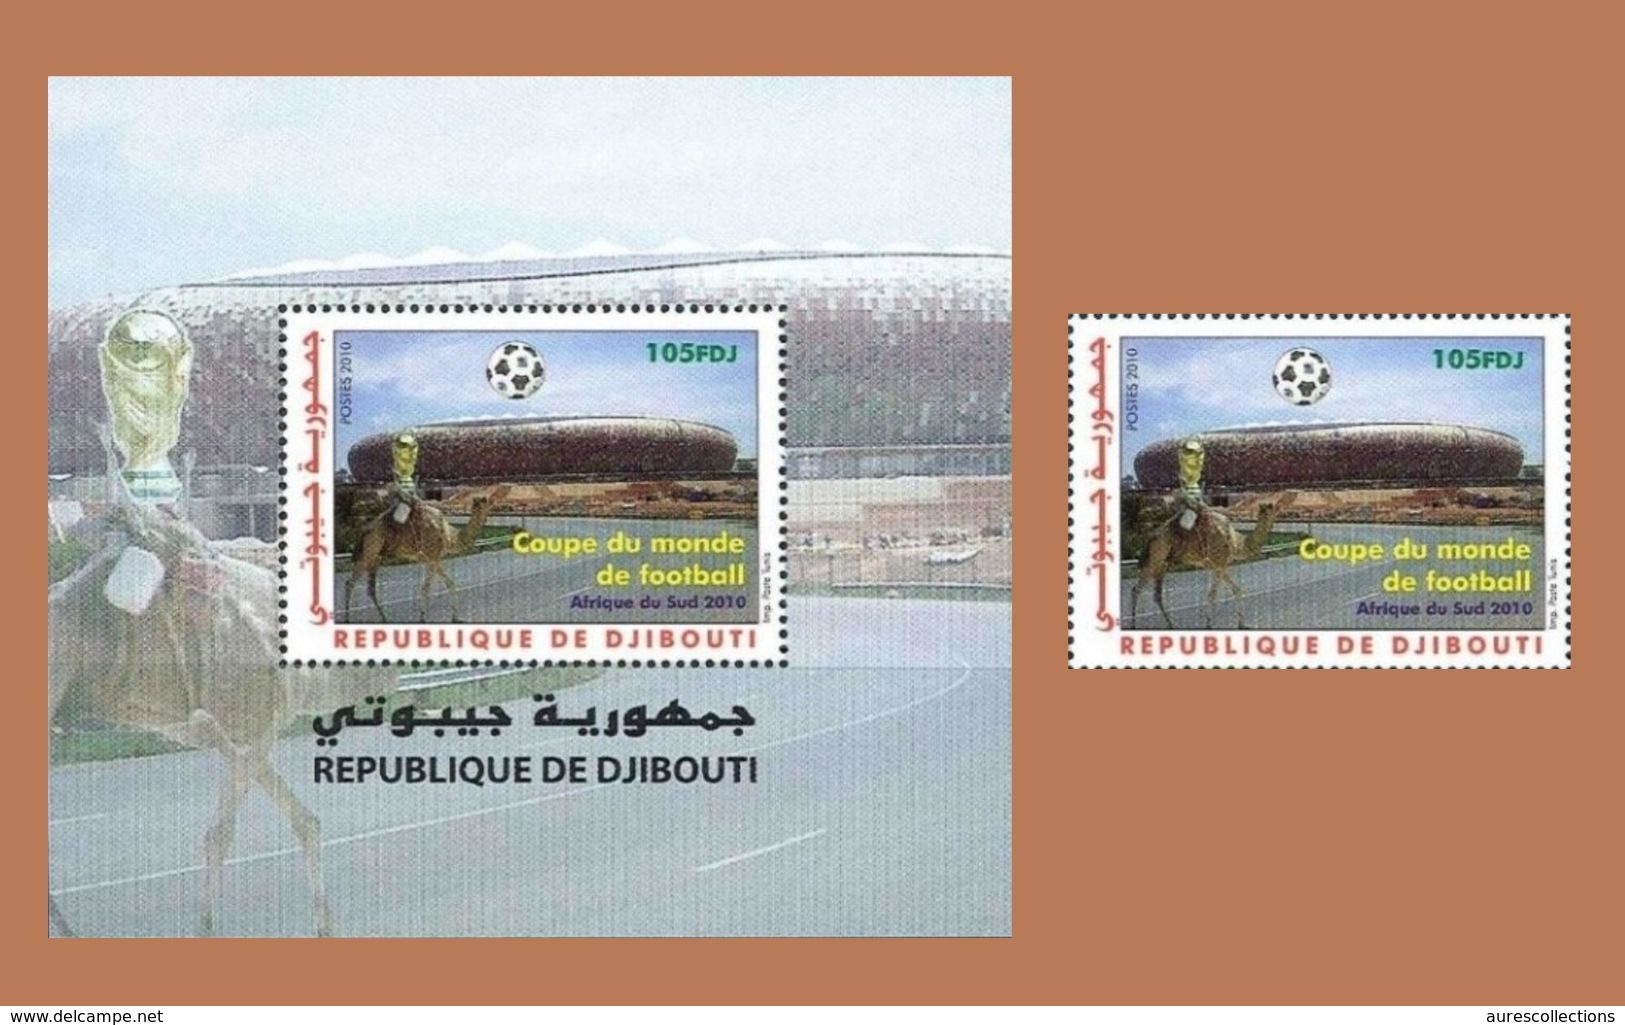 DJIBOUTI 2010 - SOUTH AFRICA SOCCER WORLD CUP COUPE DU MONDE FOOTBALL BLOC S/S SHEET + 1 VAL ULTRA RARE - MNH ** - 2010 – Sud Africa